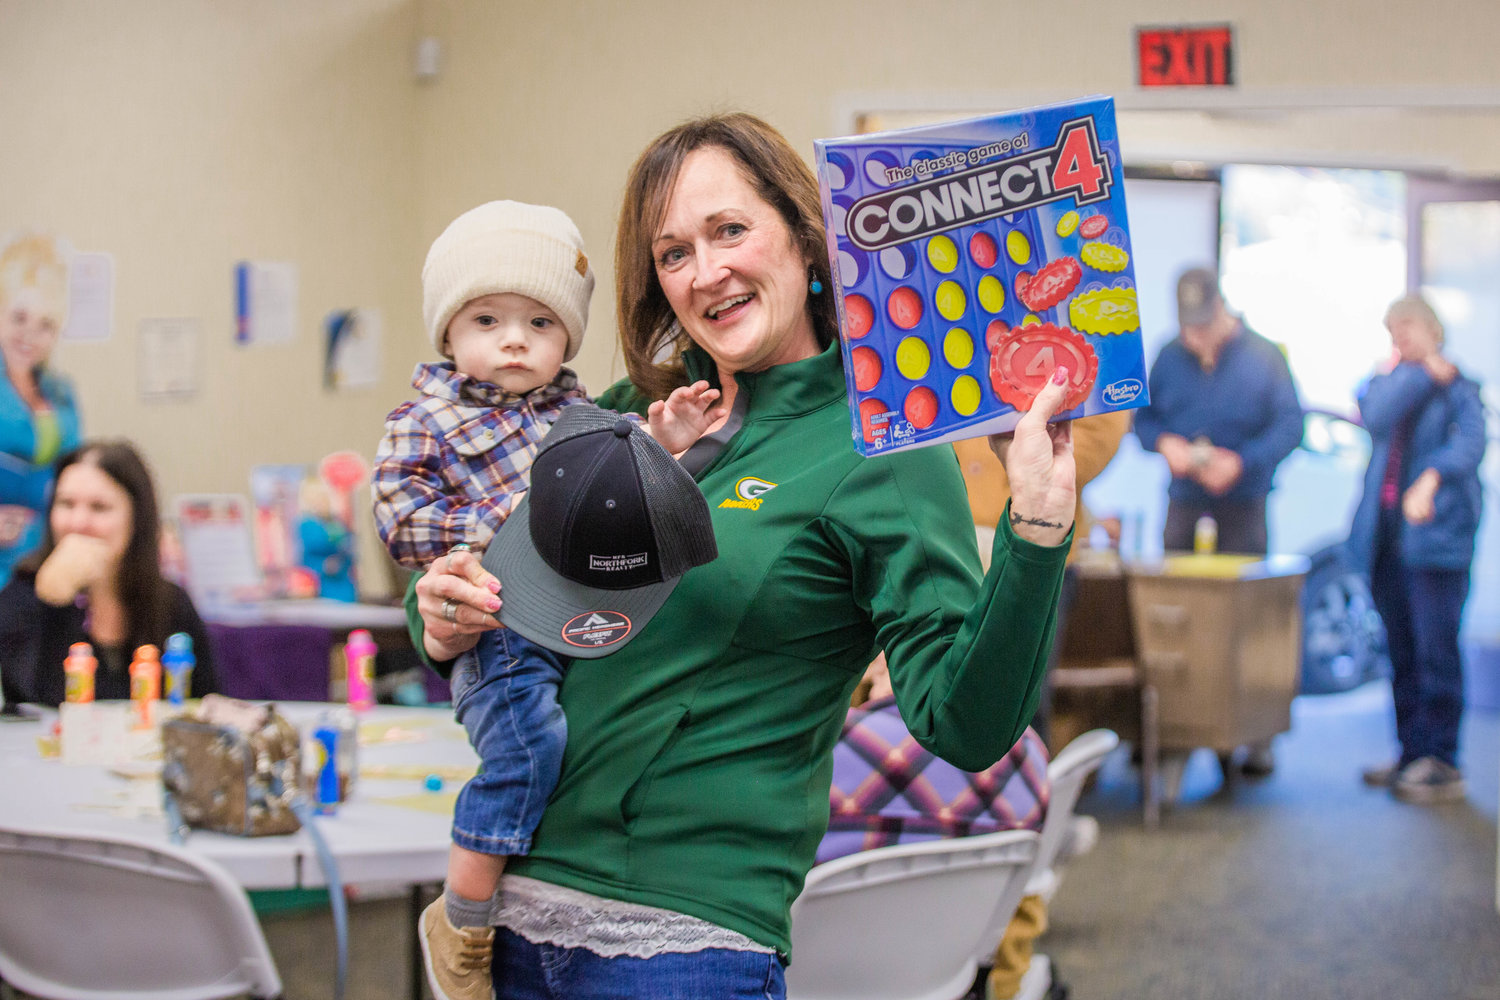 Sarah Lefebvre holds Eli Yukhno, an 11-month-old boy, and her prize of a new Connect 4 game after getting a bingo during the Twin Cities Rotary Club Turkey Bingo in the Chehalis Eagles building on Saturday afternoon.